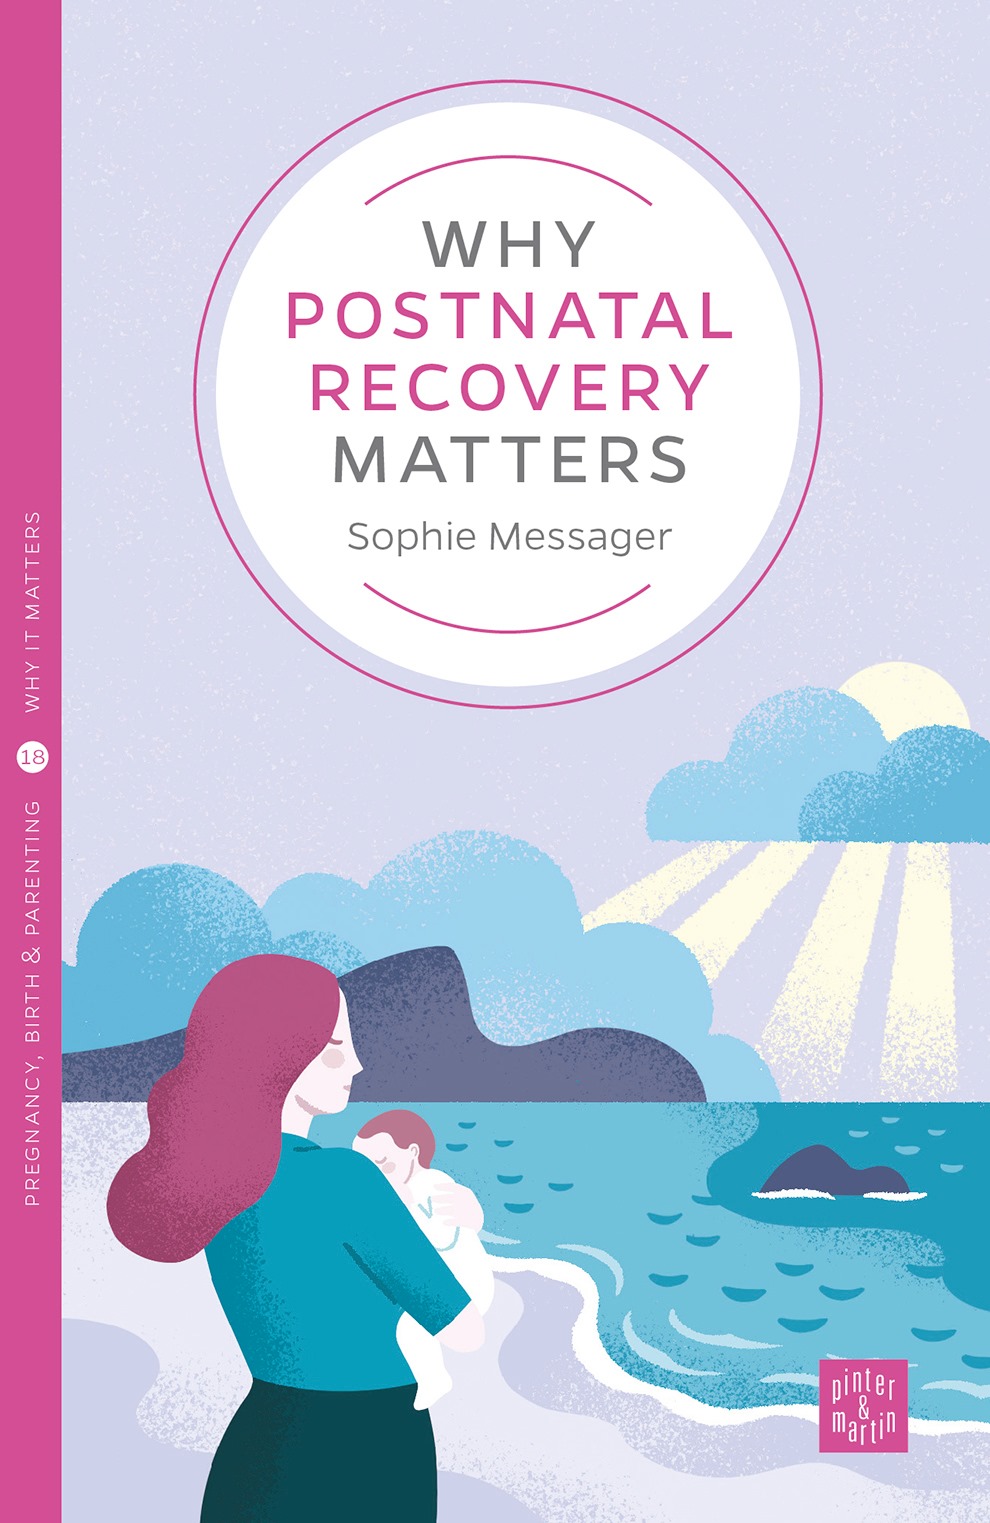 Why Postnatal Recovery Matters by Sophie Messager  image